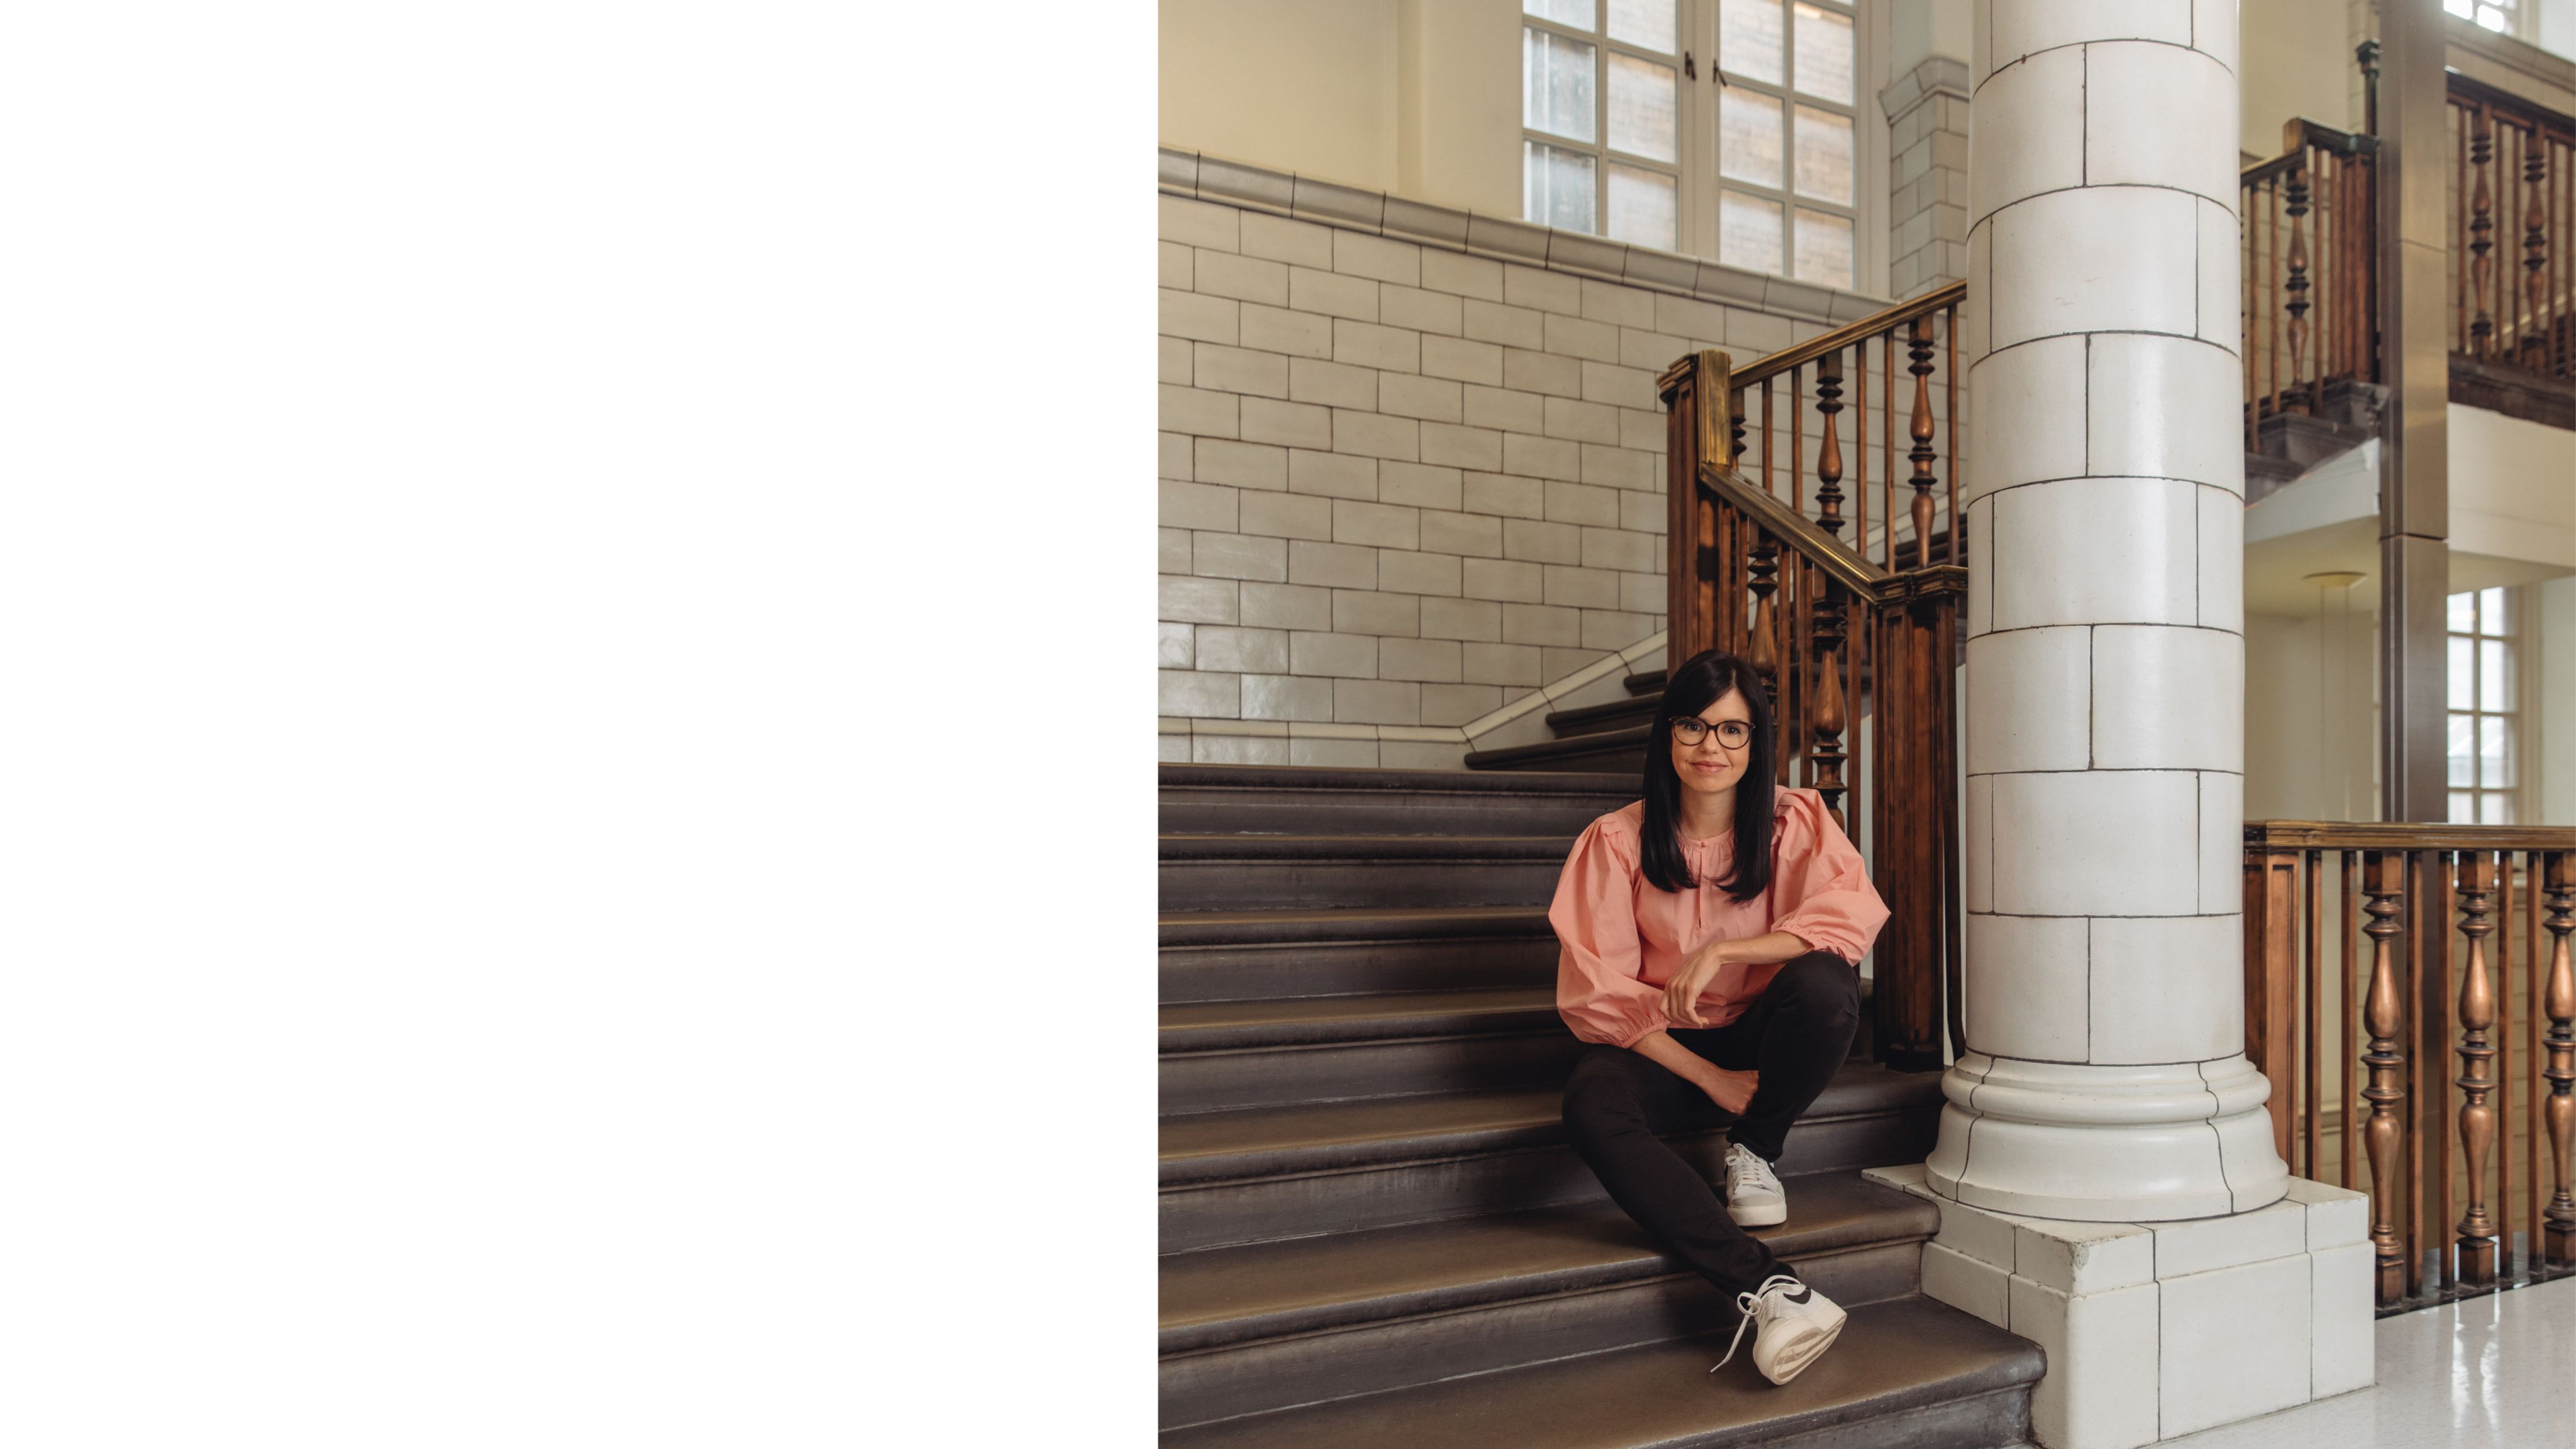 Jess, a woman with dark hair and glasses, sits on the steps inside the Royal School of Mines.